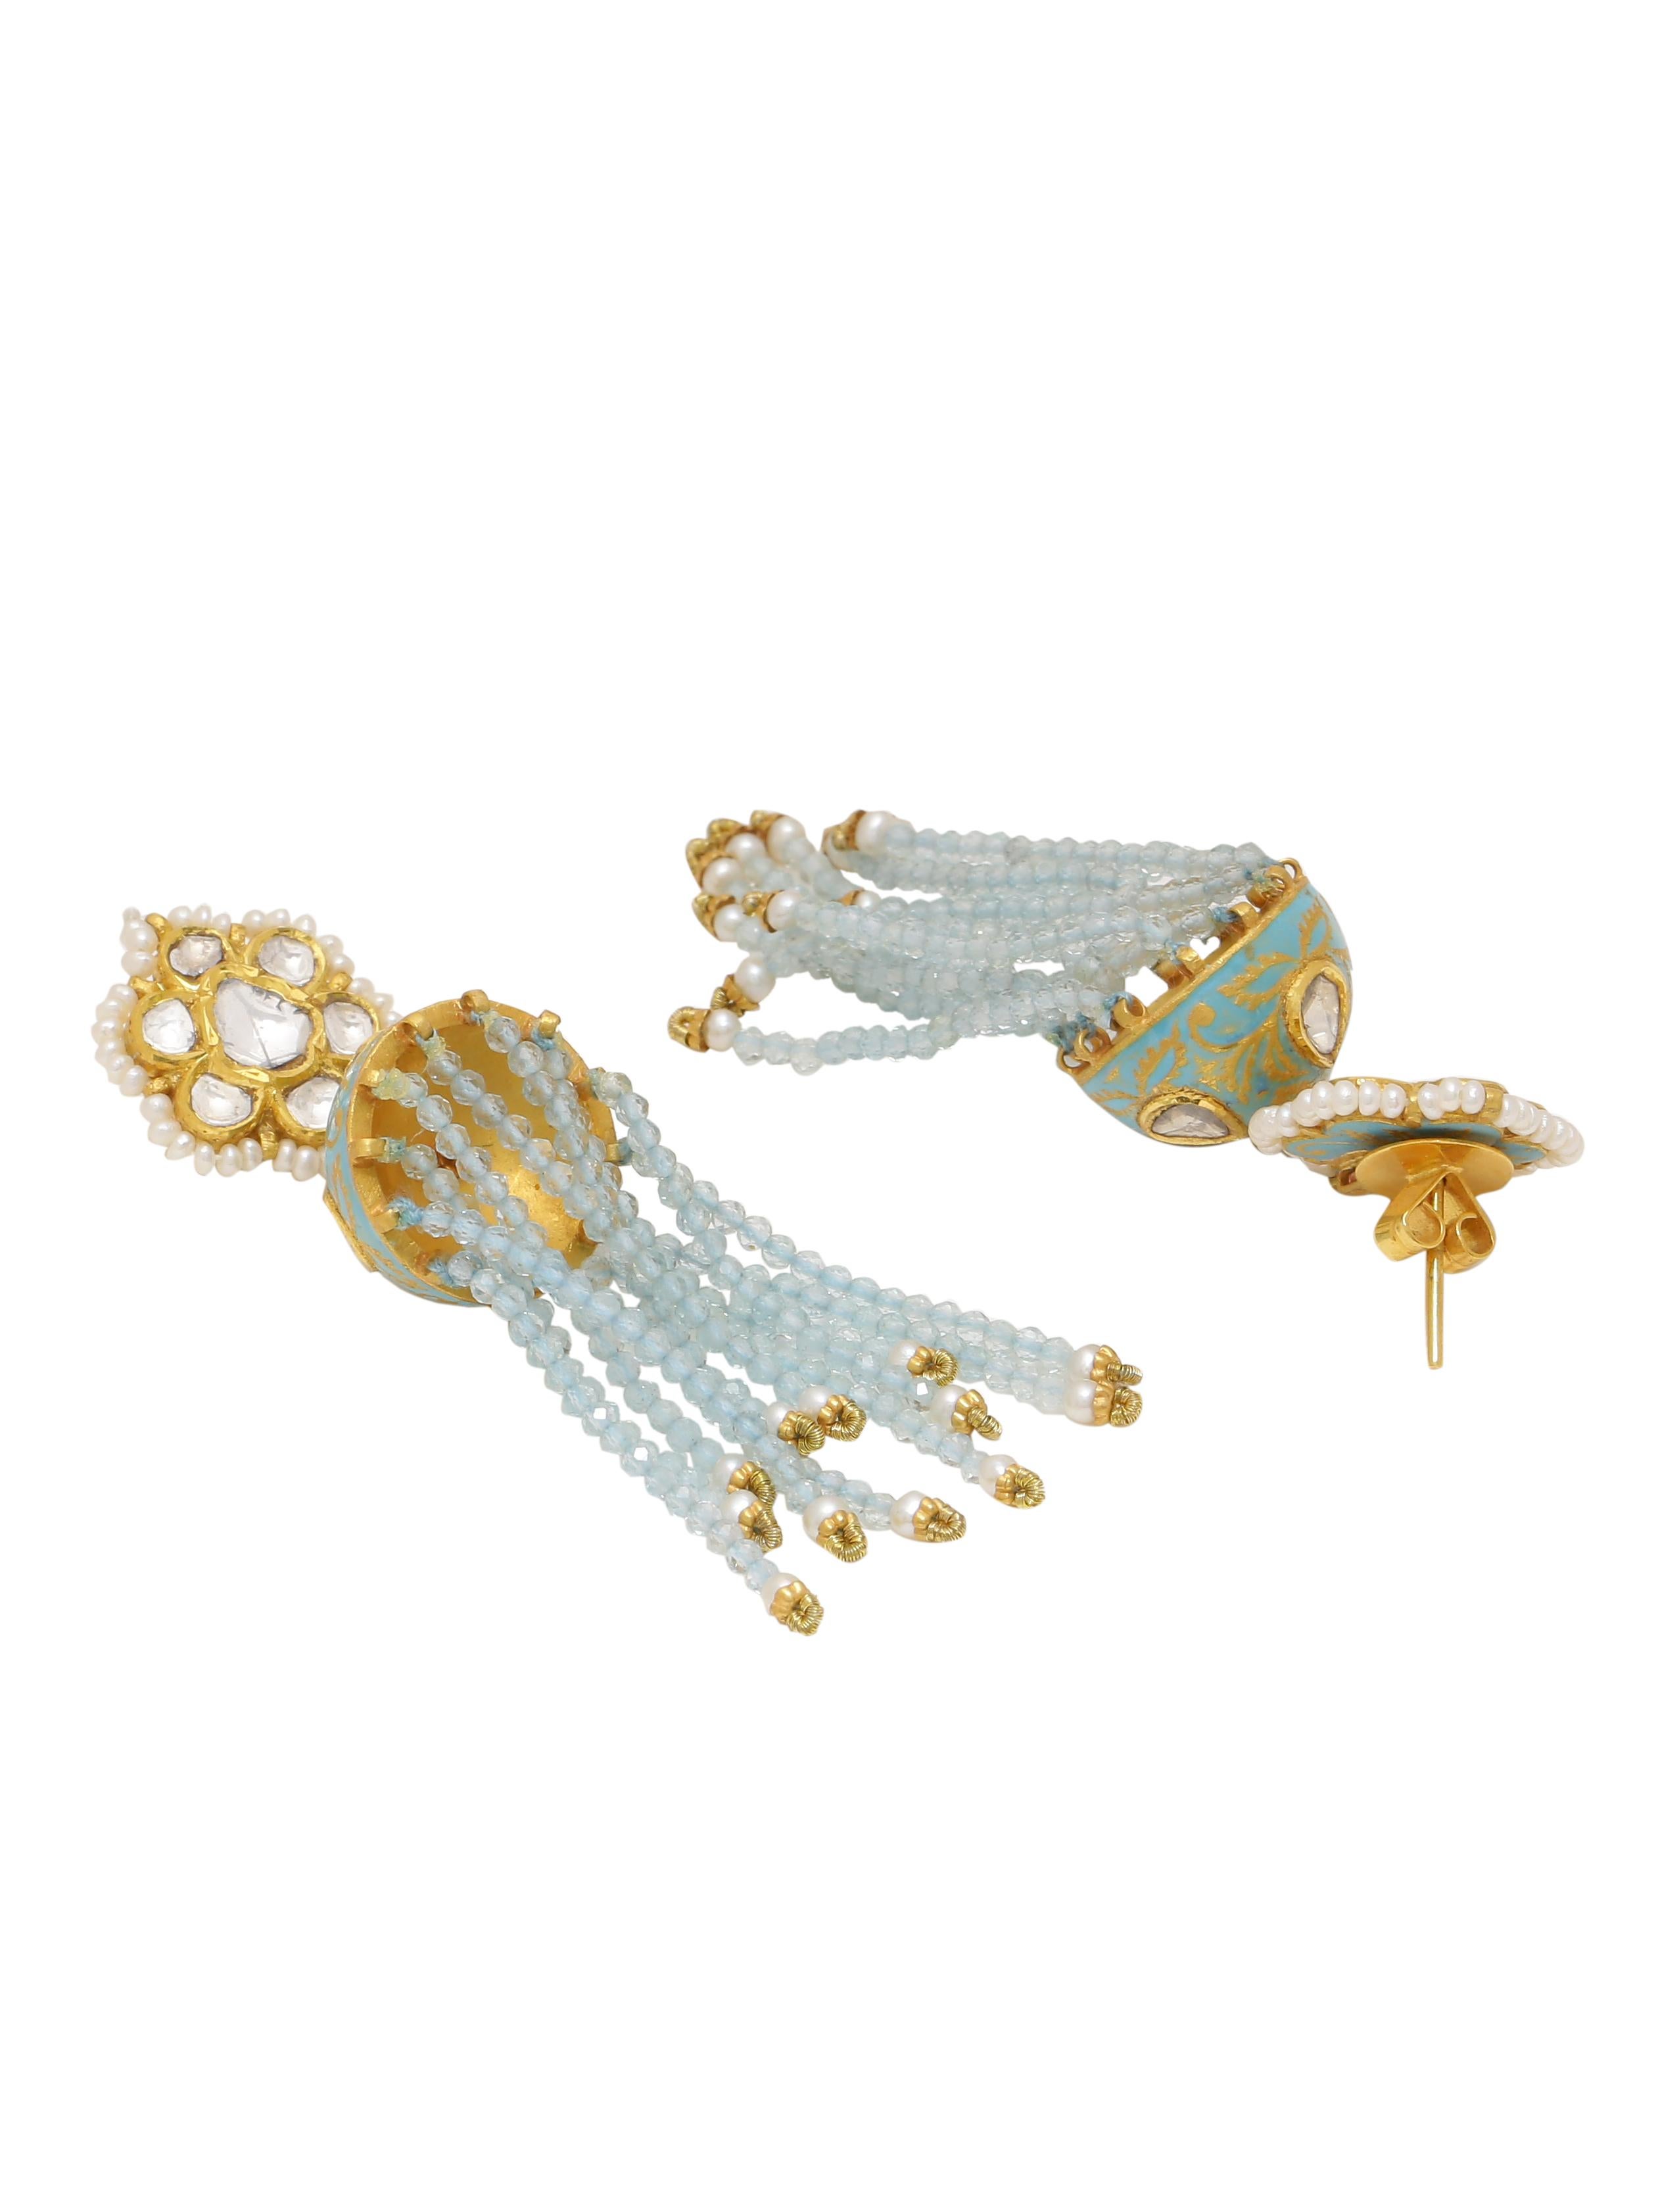 A pair of beautiful earrings with Flat diamonds known as 